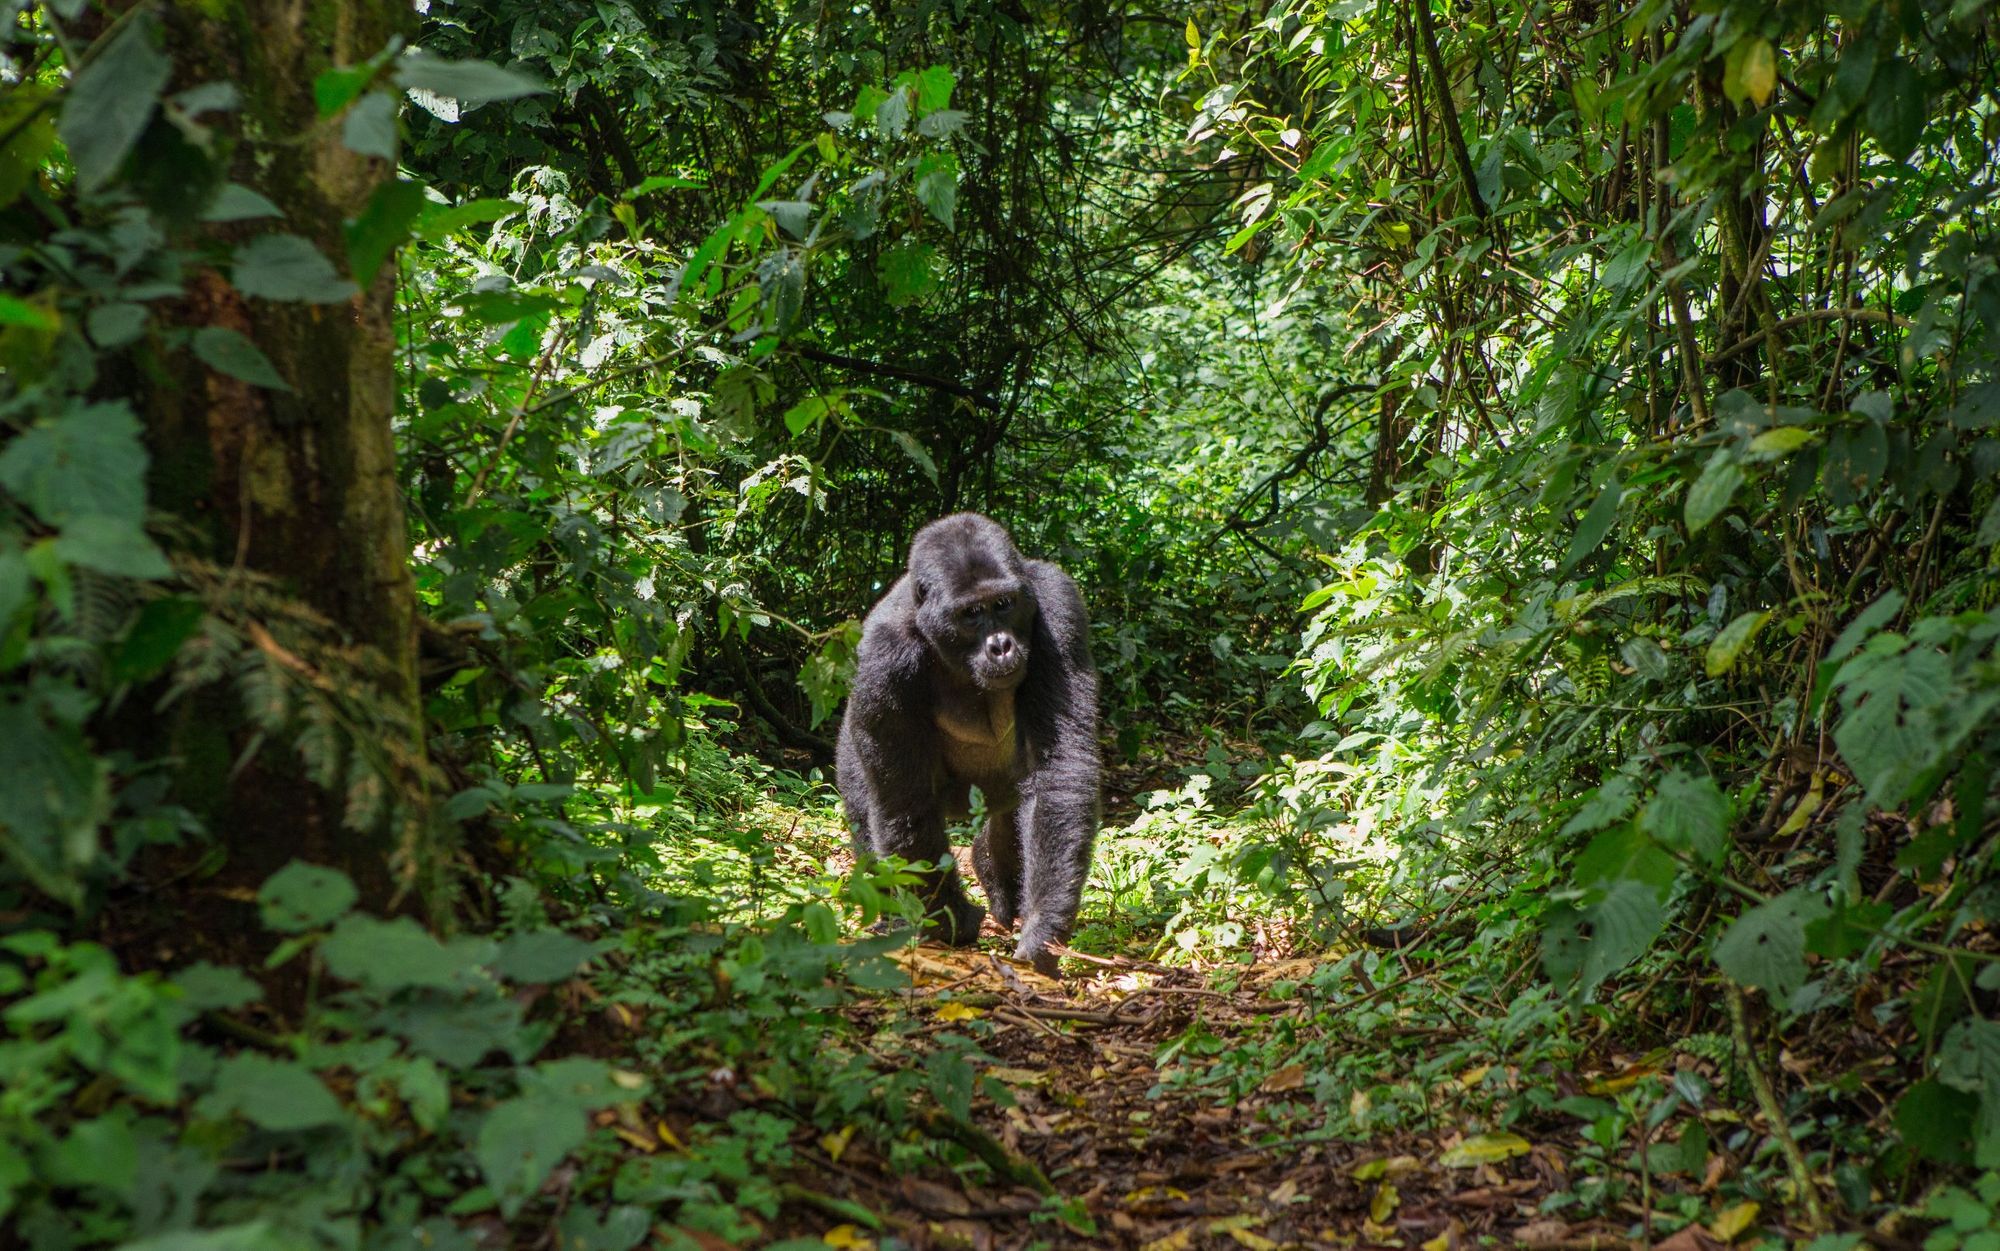 Uganda is one of the very few places in the world where you can still see eastern gorillas in the wild. Photo: Getty